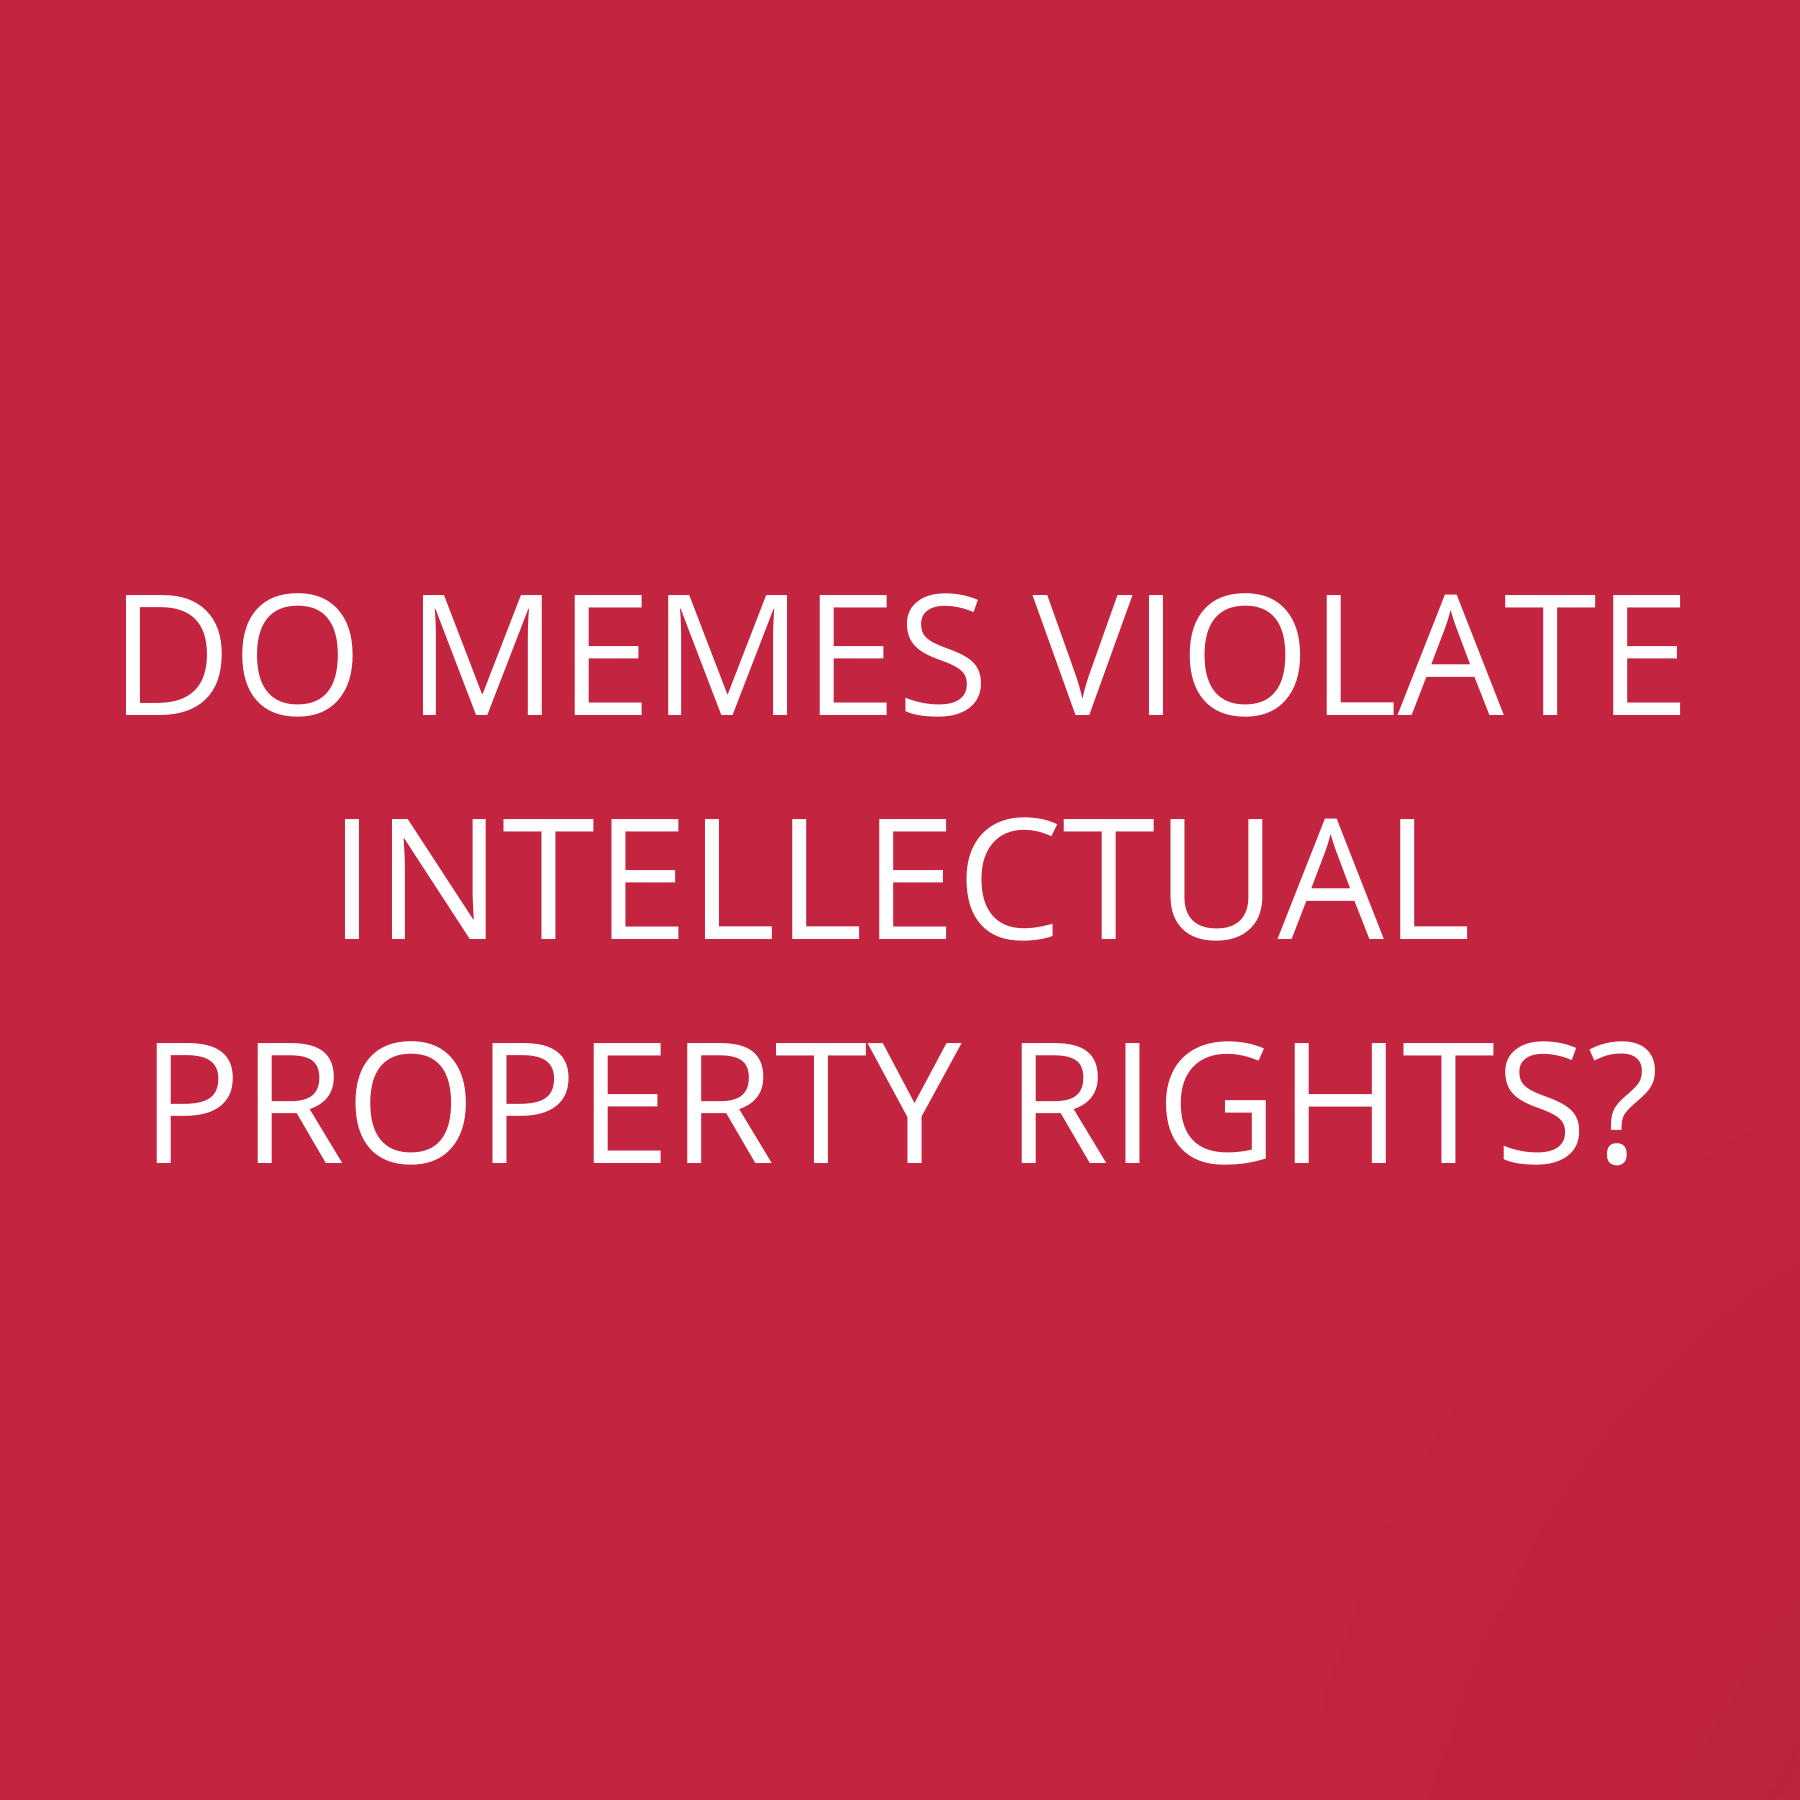 Do memes violate Intellectual Property Rights?